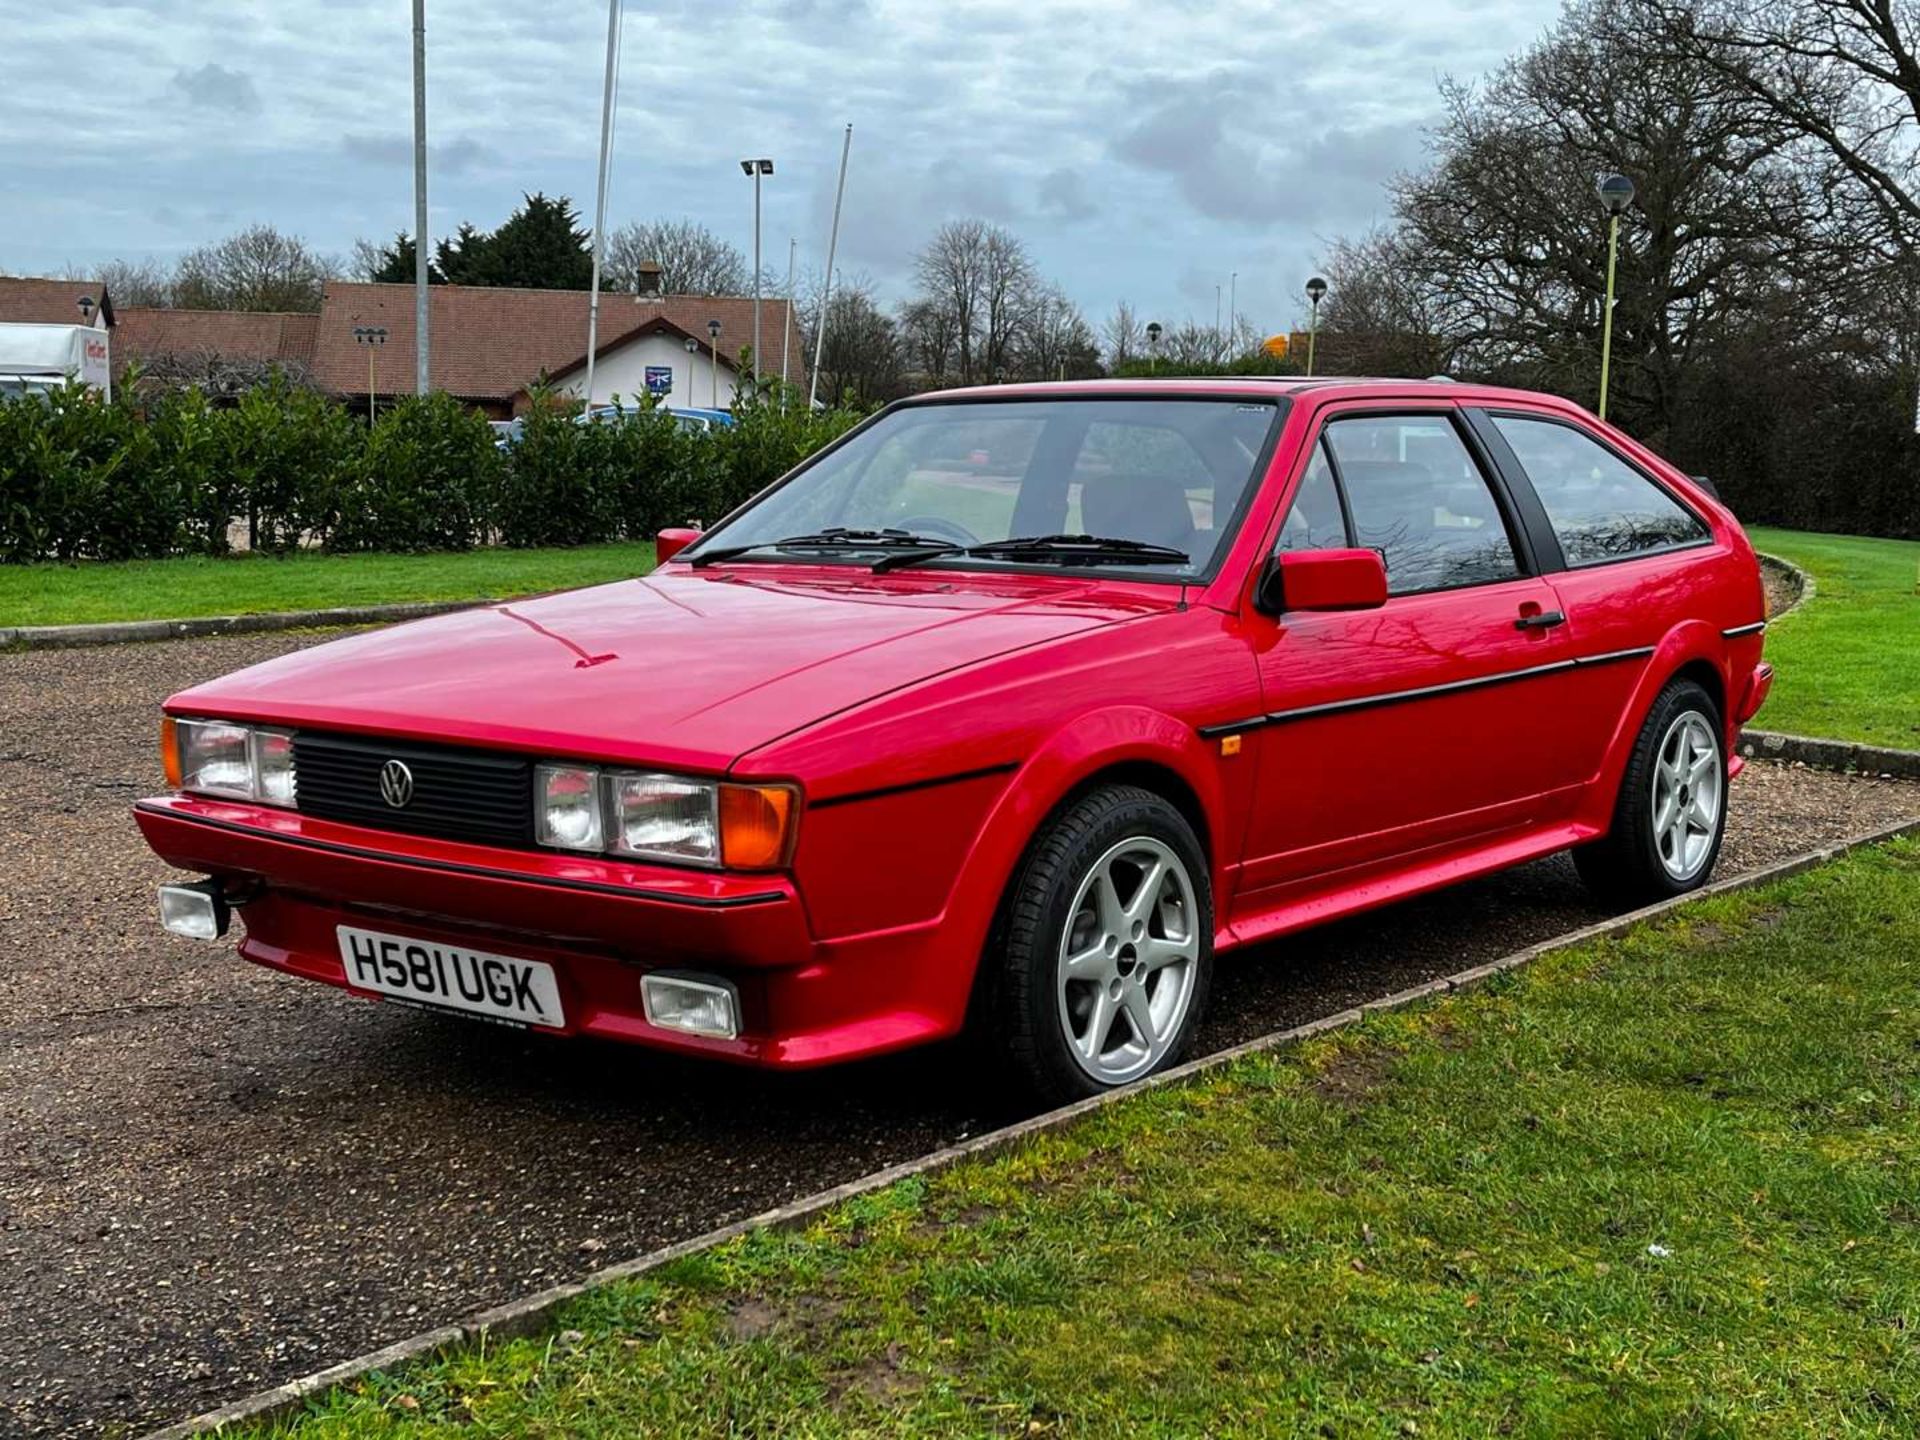 1990 VW SCIROCCO 1.8 GT - Image 3 of 29